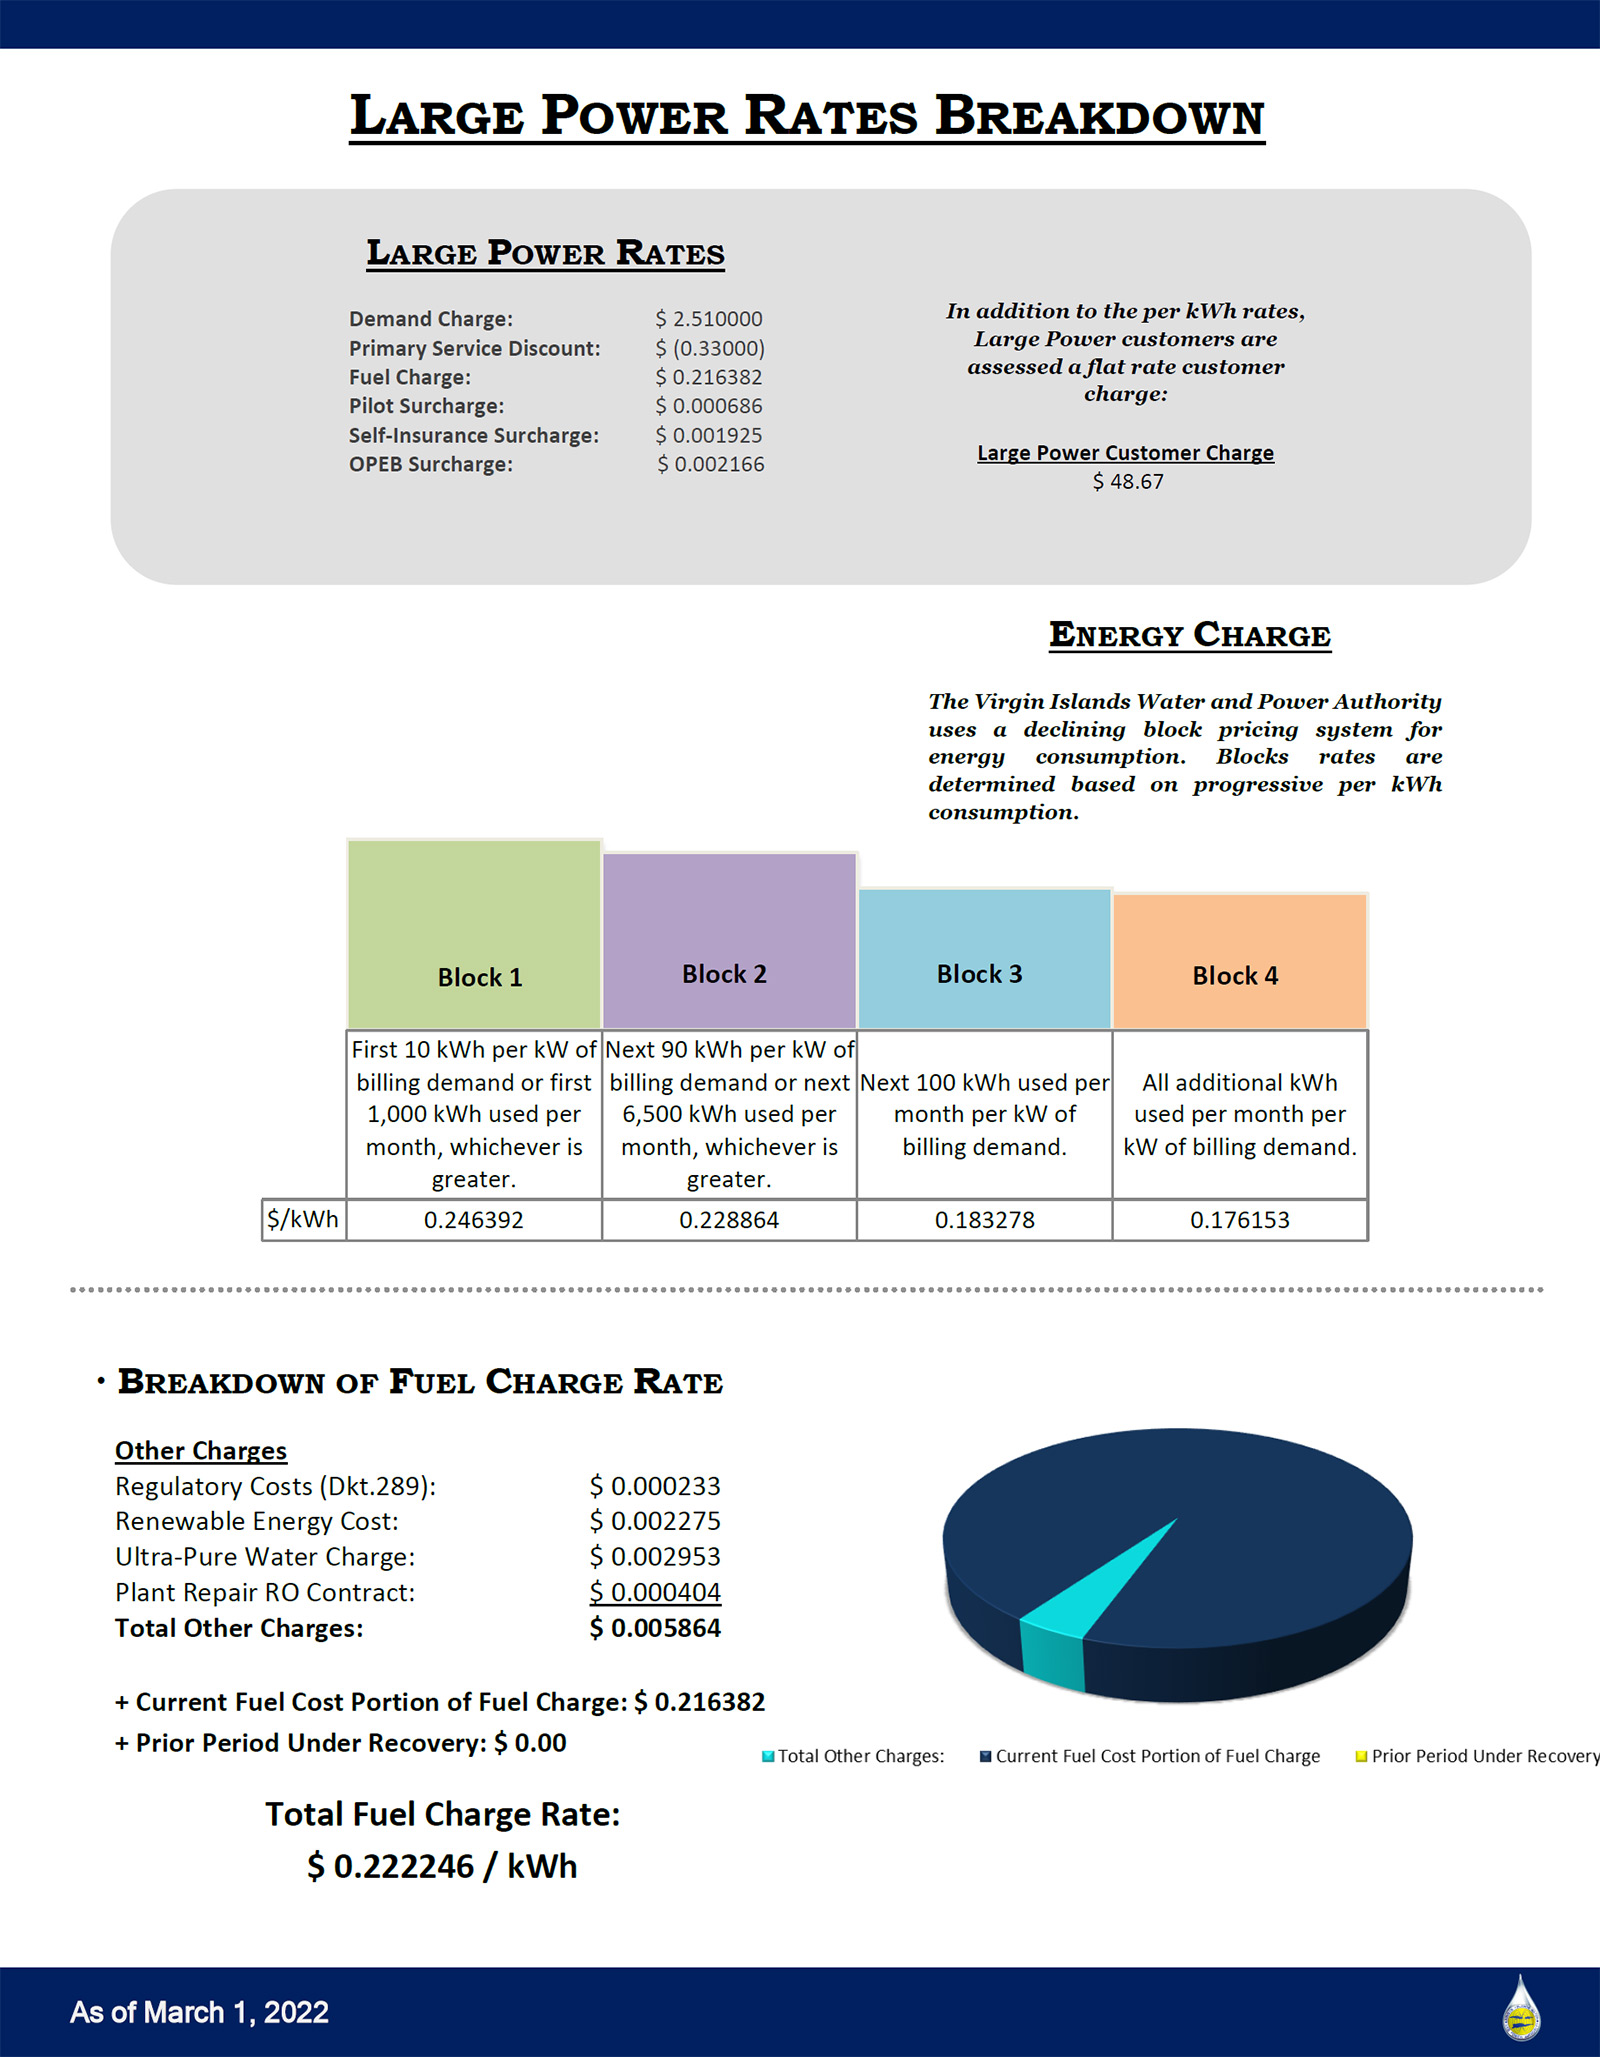 Electric Rate infographic with vast information on large power rates